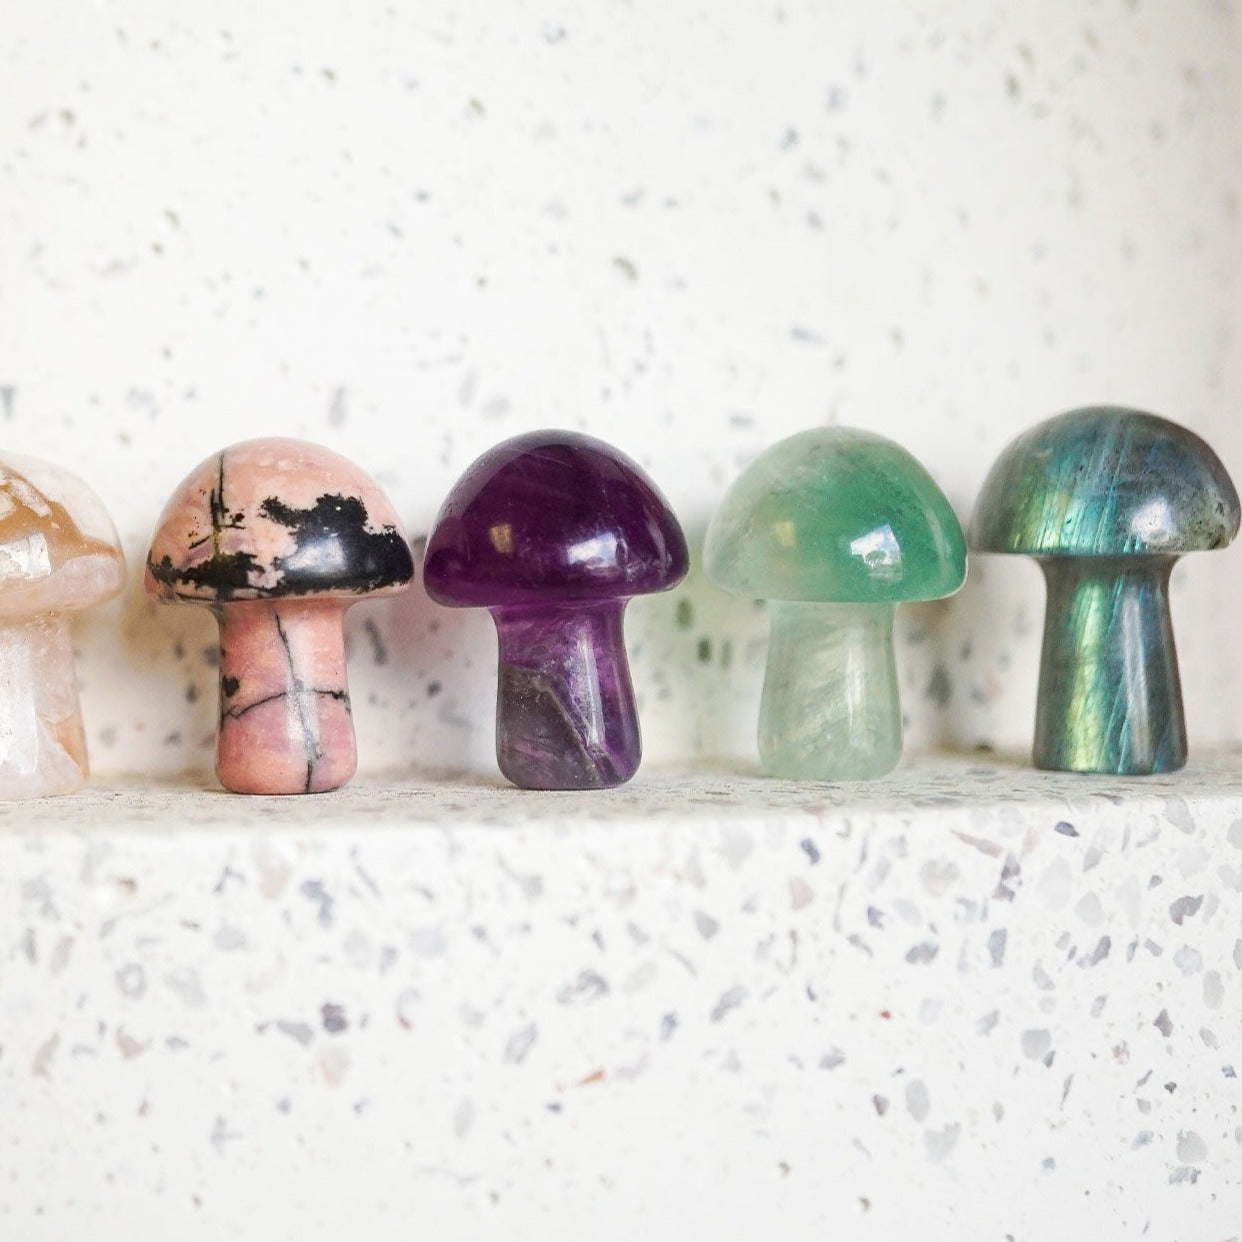 7 mushroom shaped figurines created from natural crystal by Energy Muse